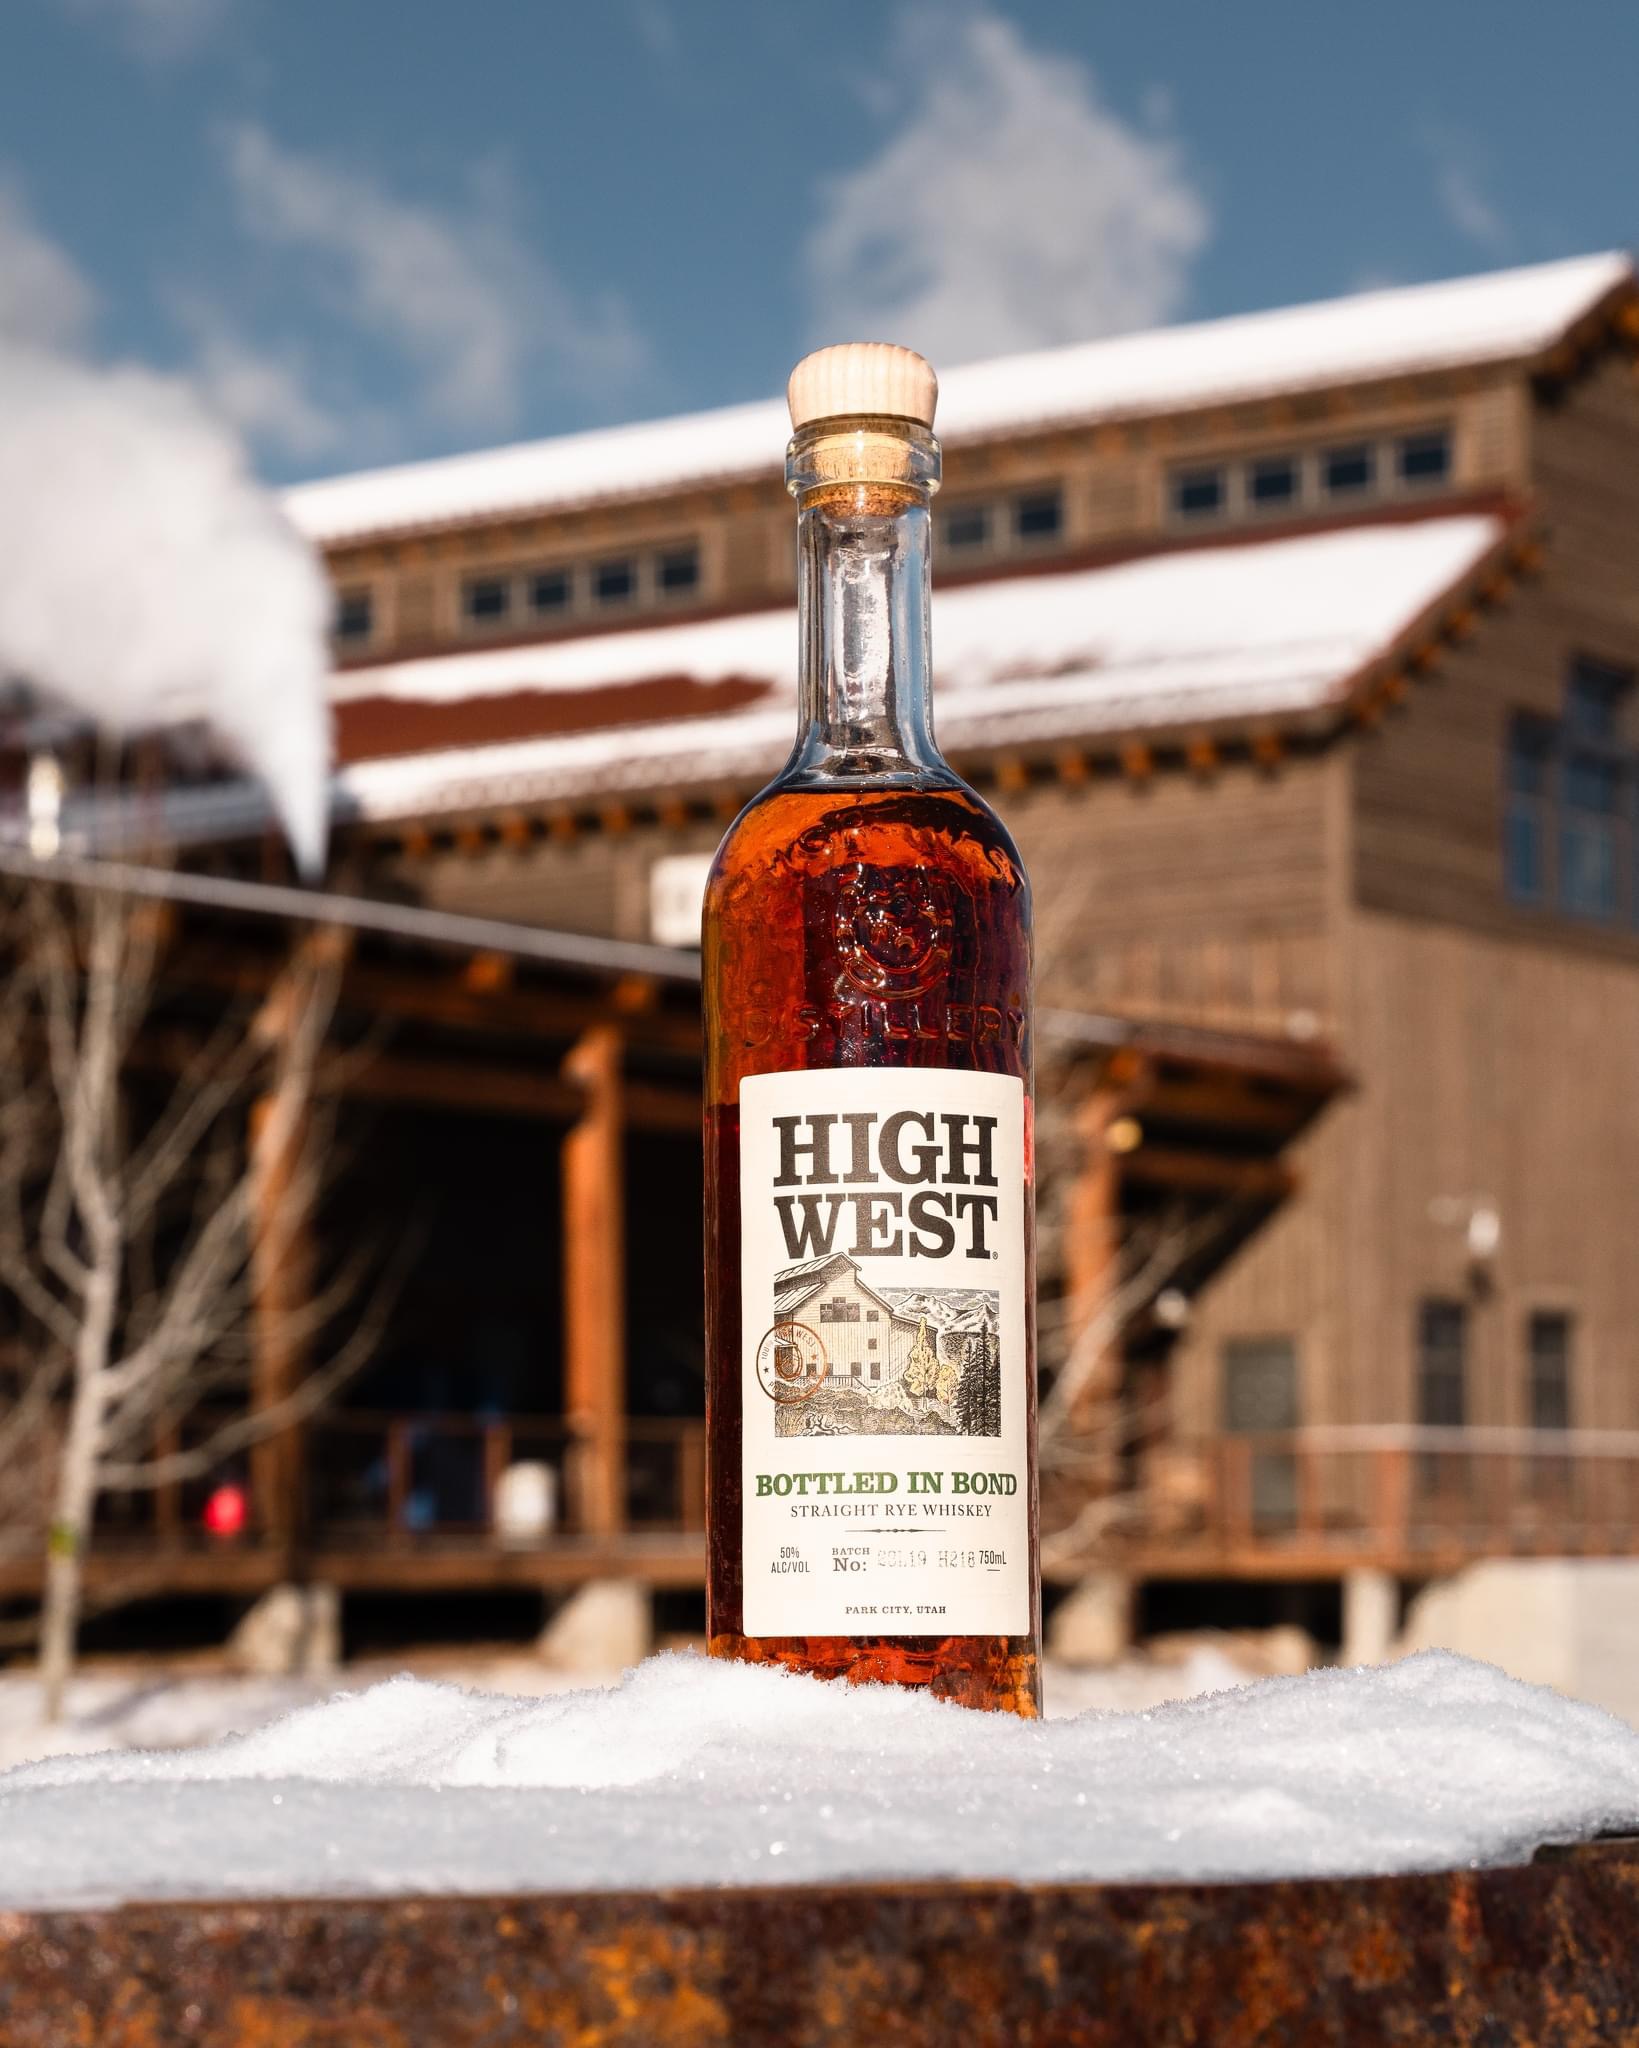 High West Releases First Bottled In Bond Rye Whiskey